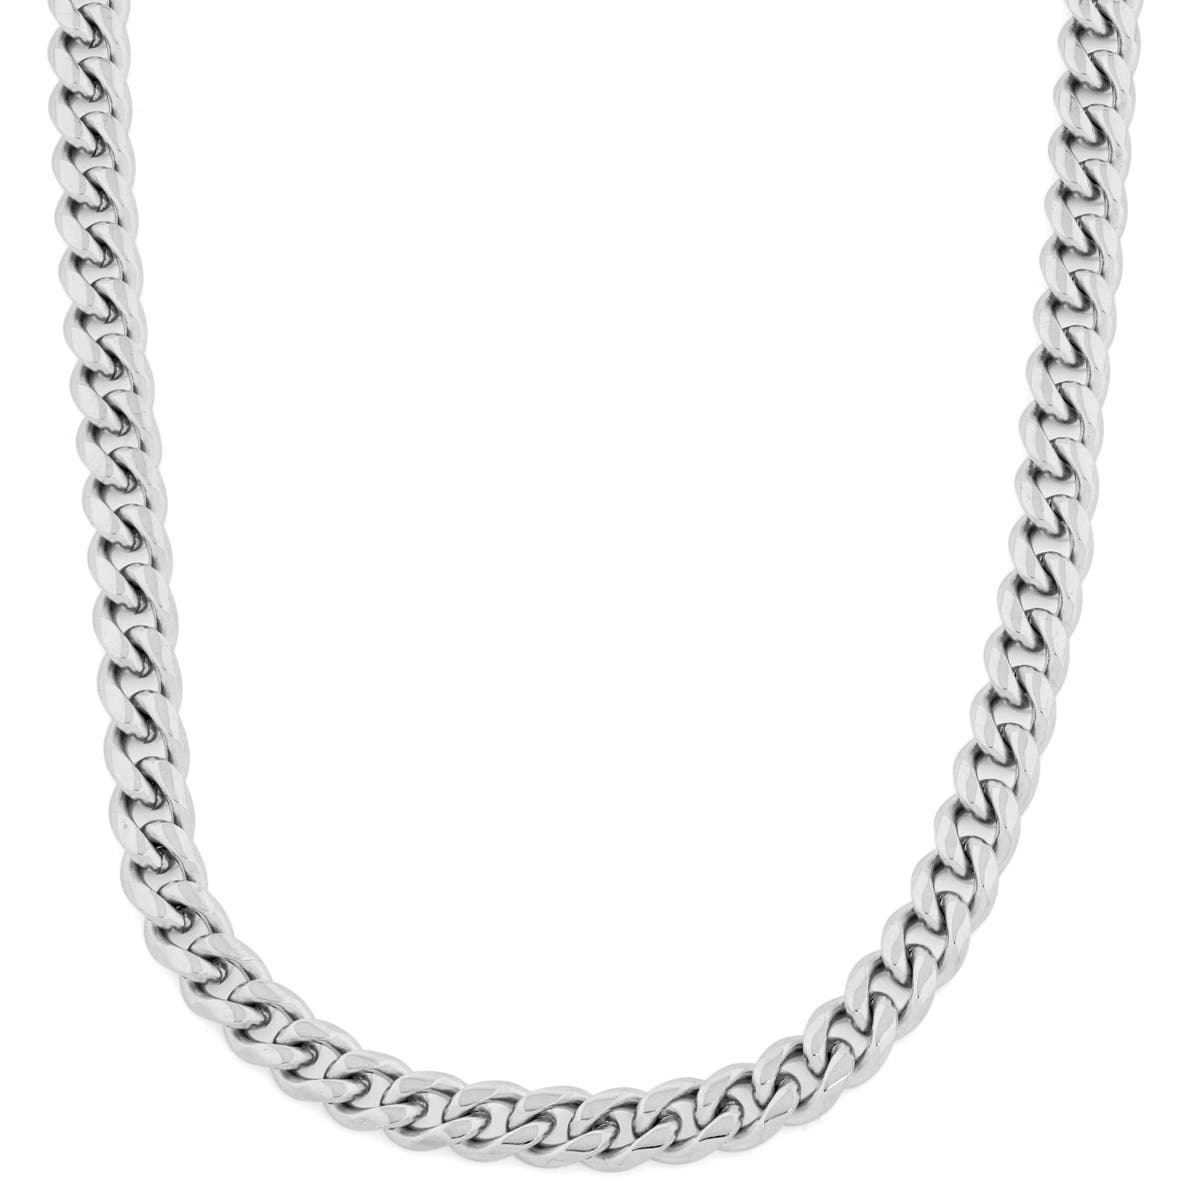 10 mm Silver-Tone Chain Necklace | In stock! | Lucleon